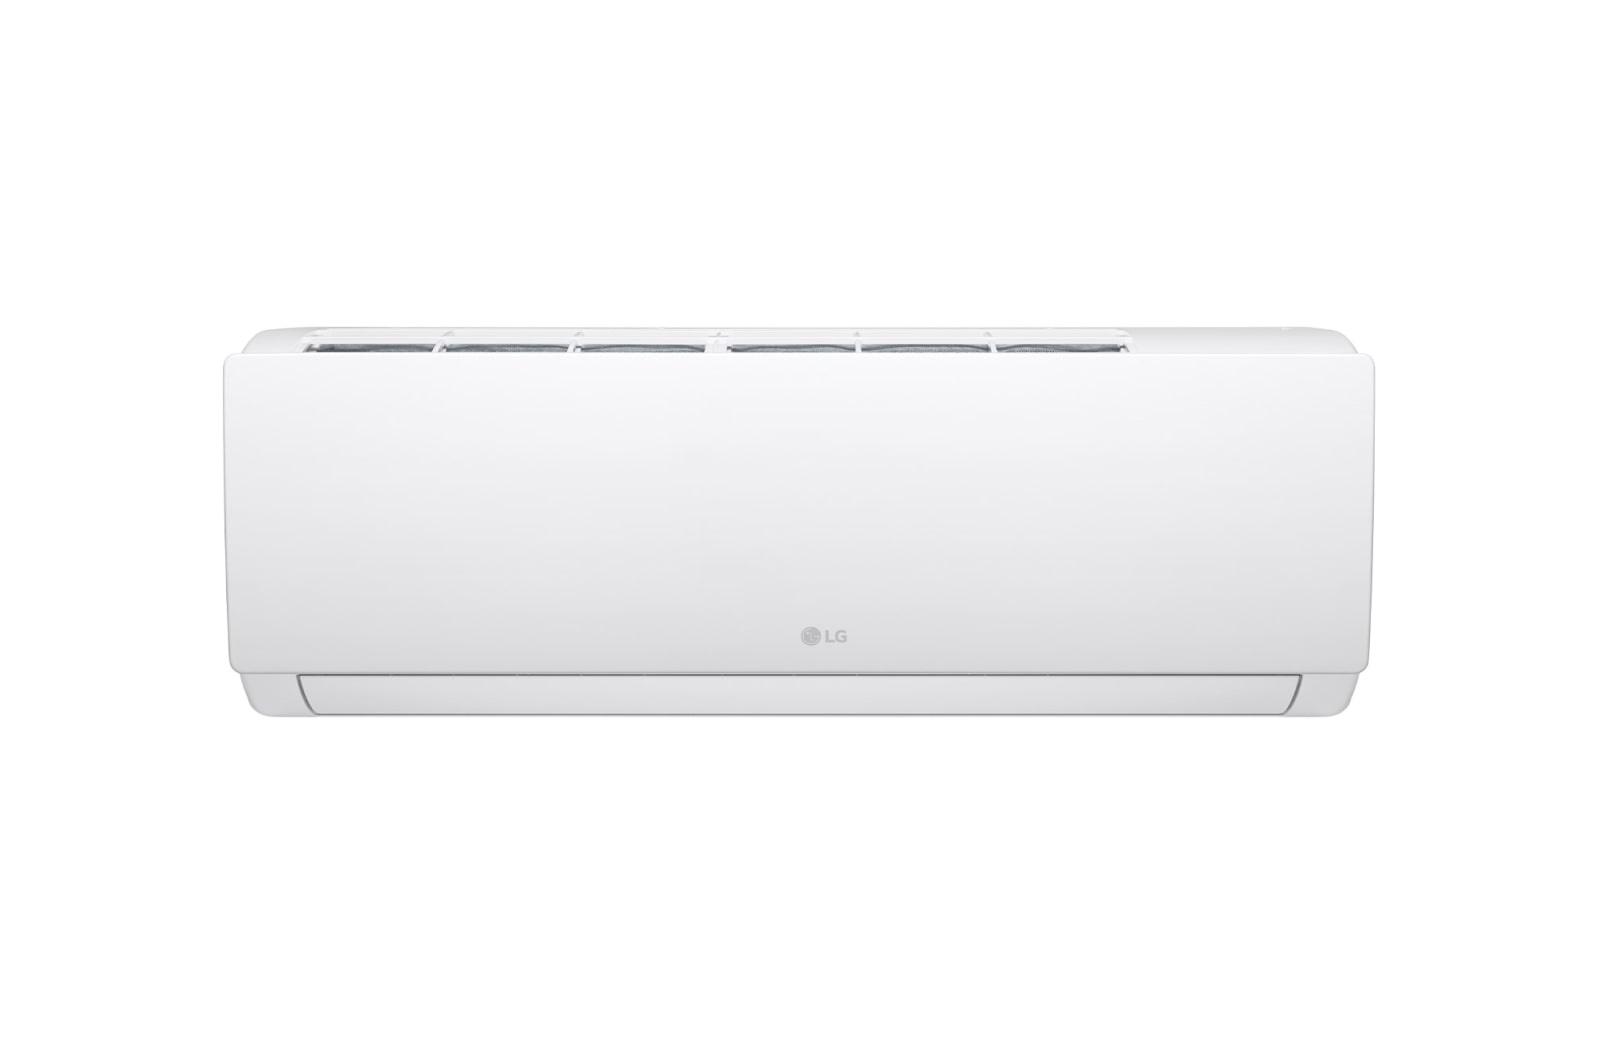 LG Hero Split Air Conditioner, 1.5HP, Cooling Only, White - S4-C12TZAAF